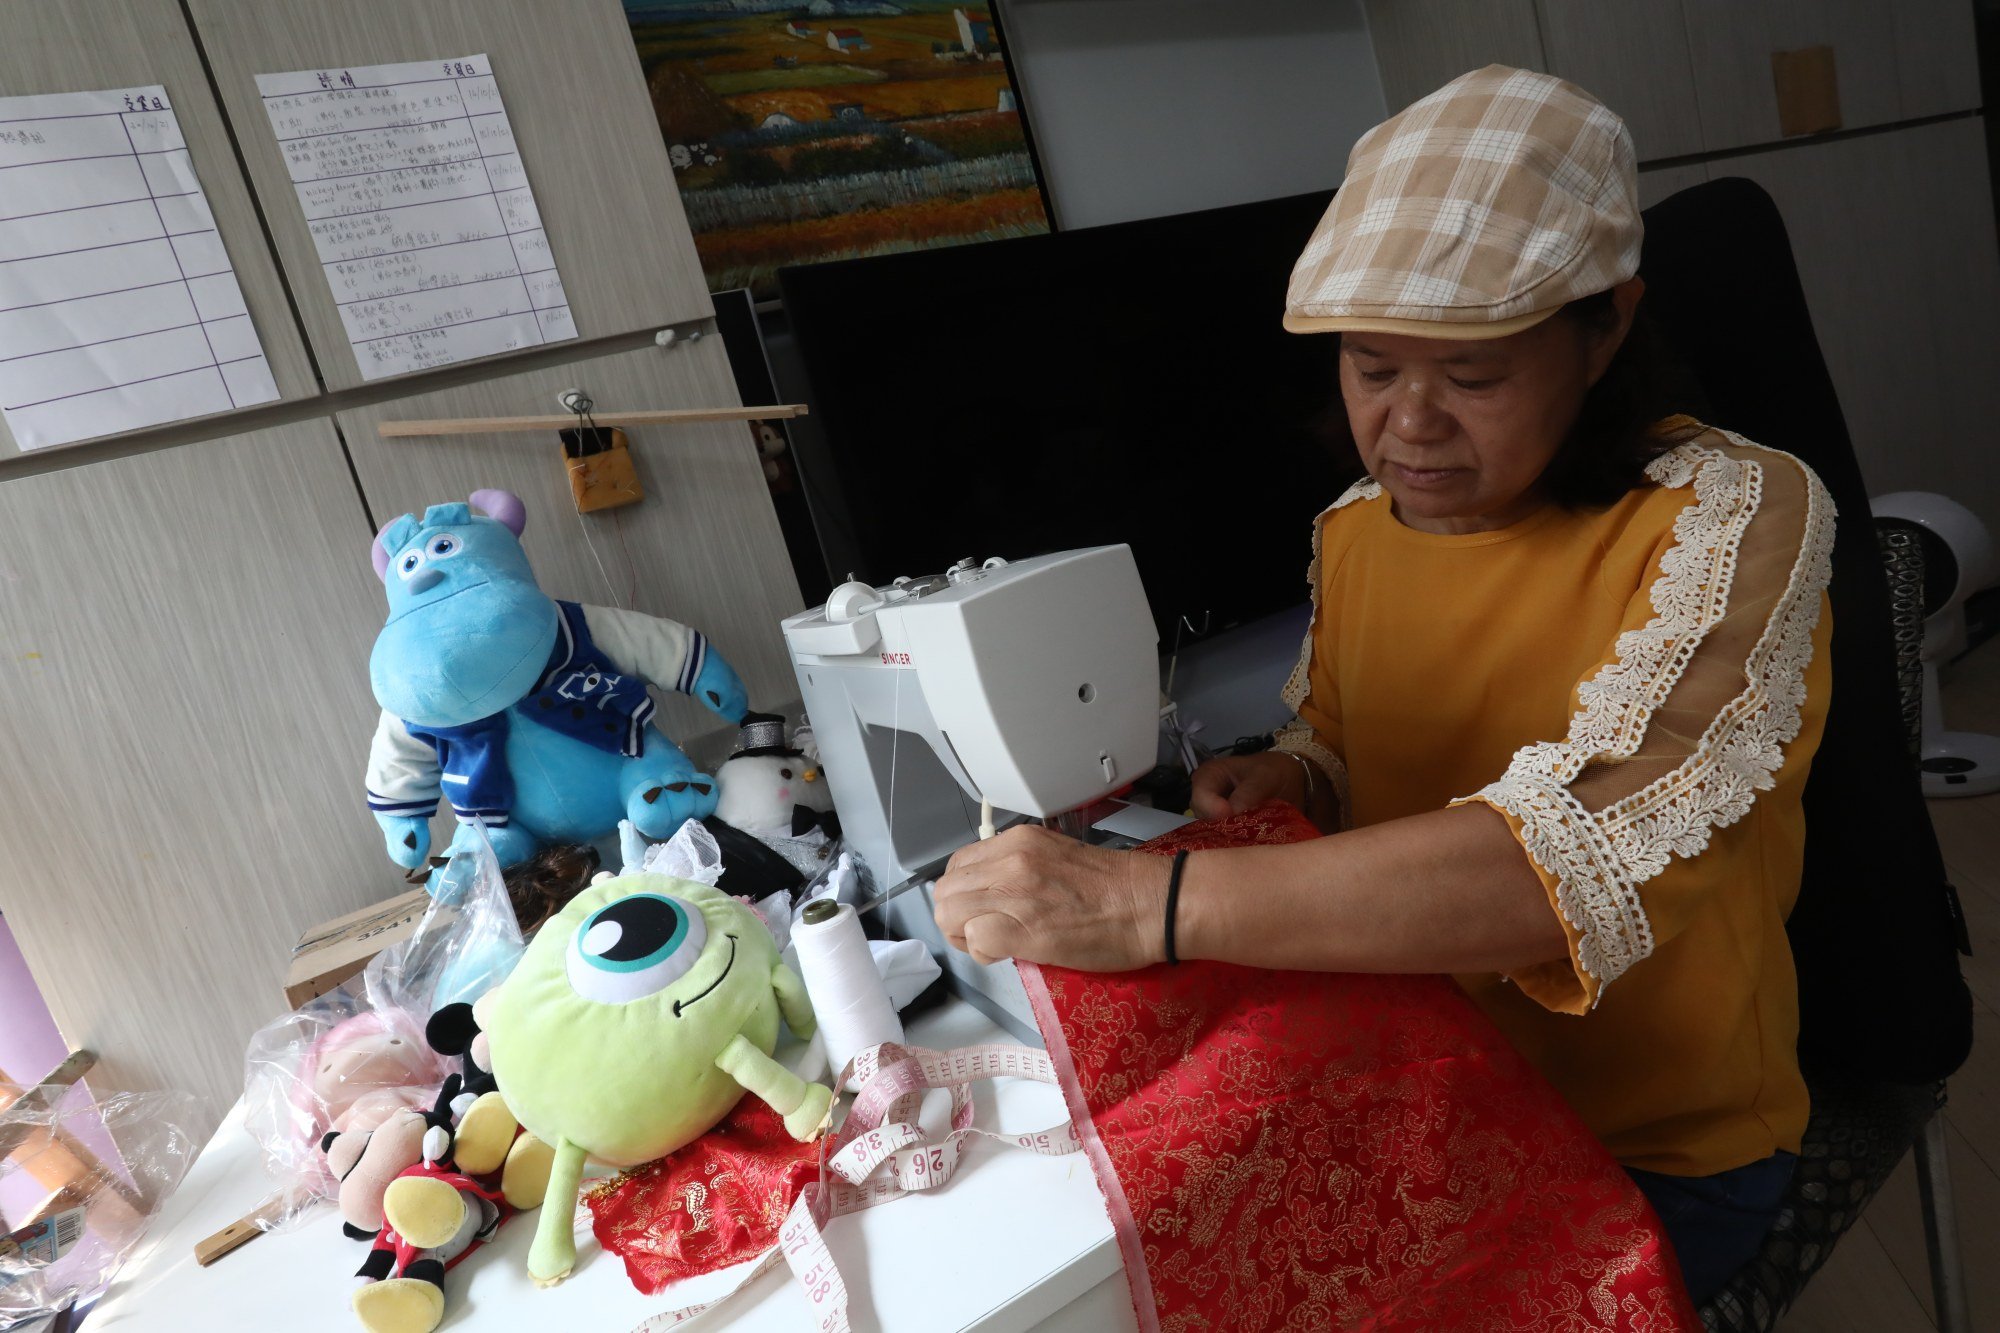 Wedding doll dress maker on keeping a unique Hong Kong tradition alive